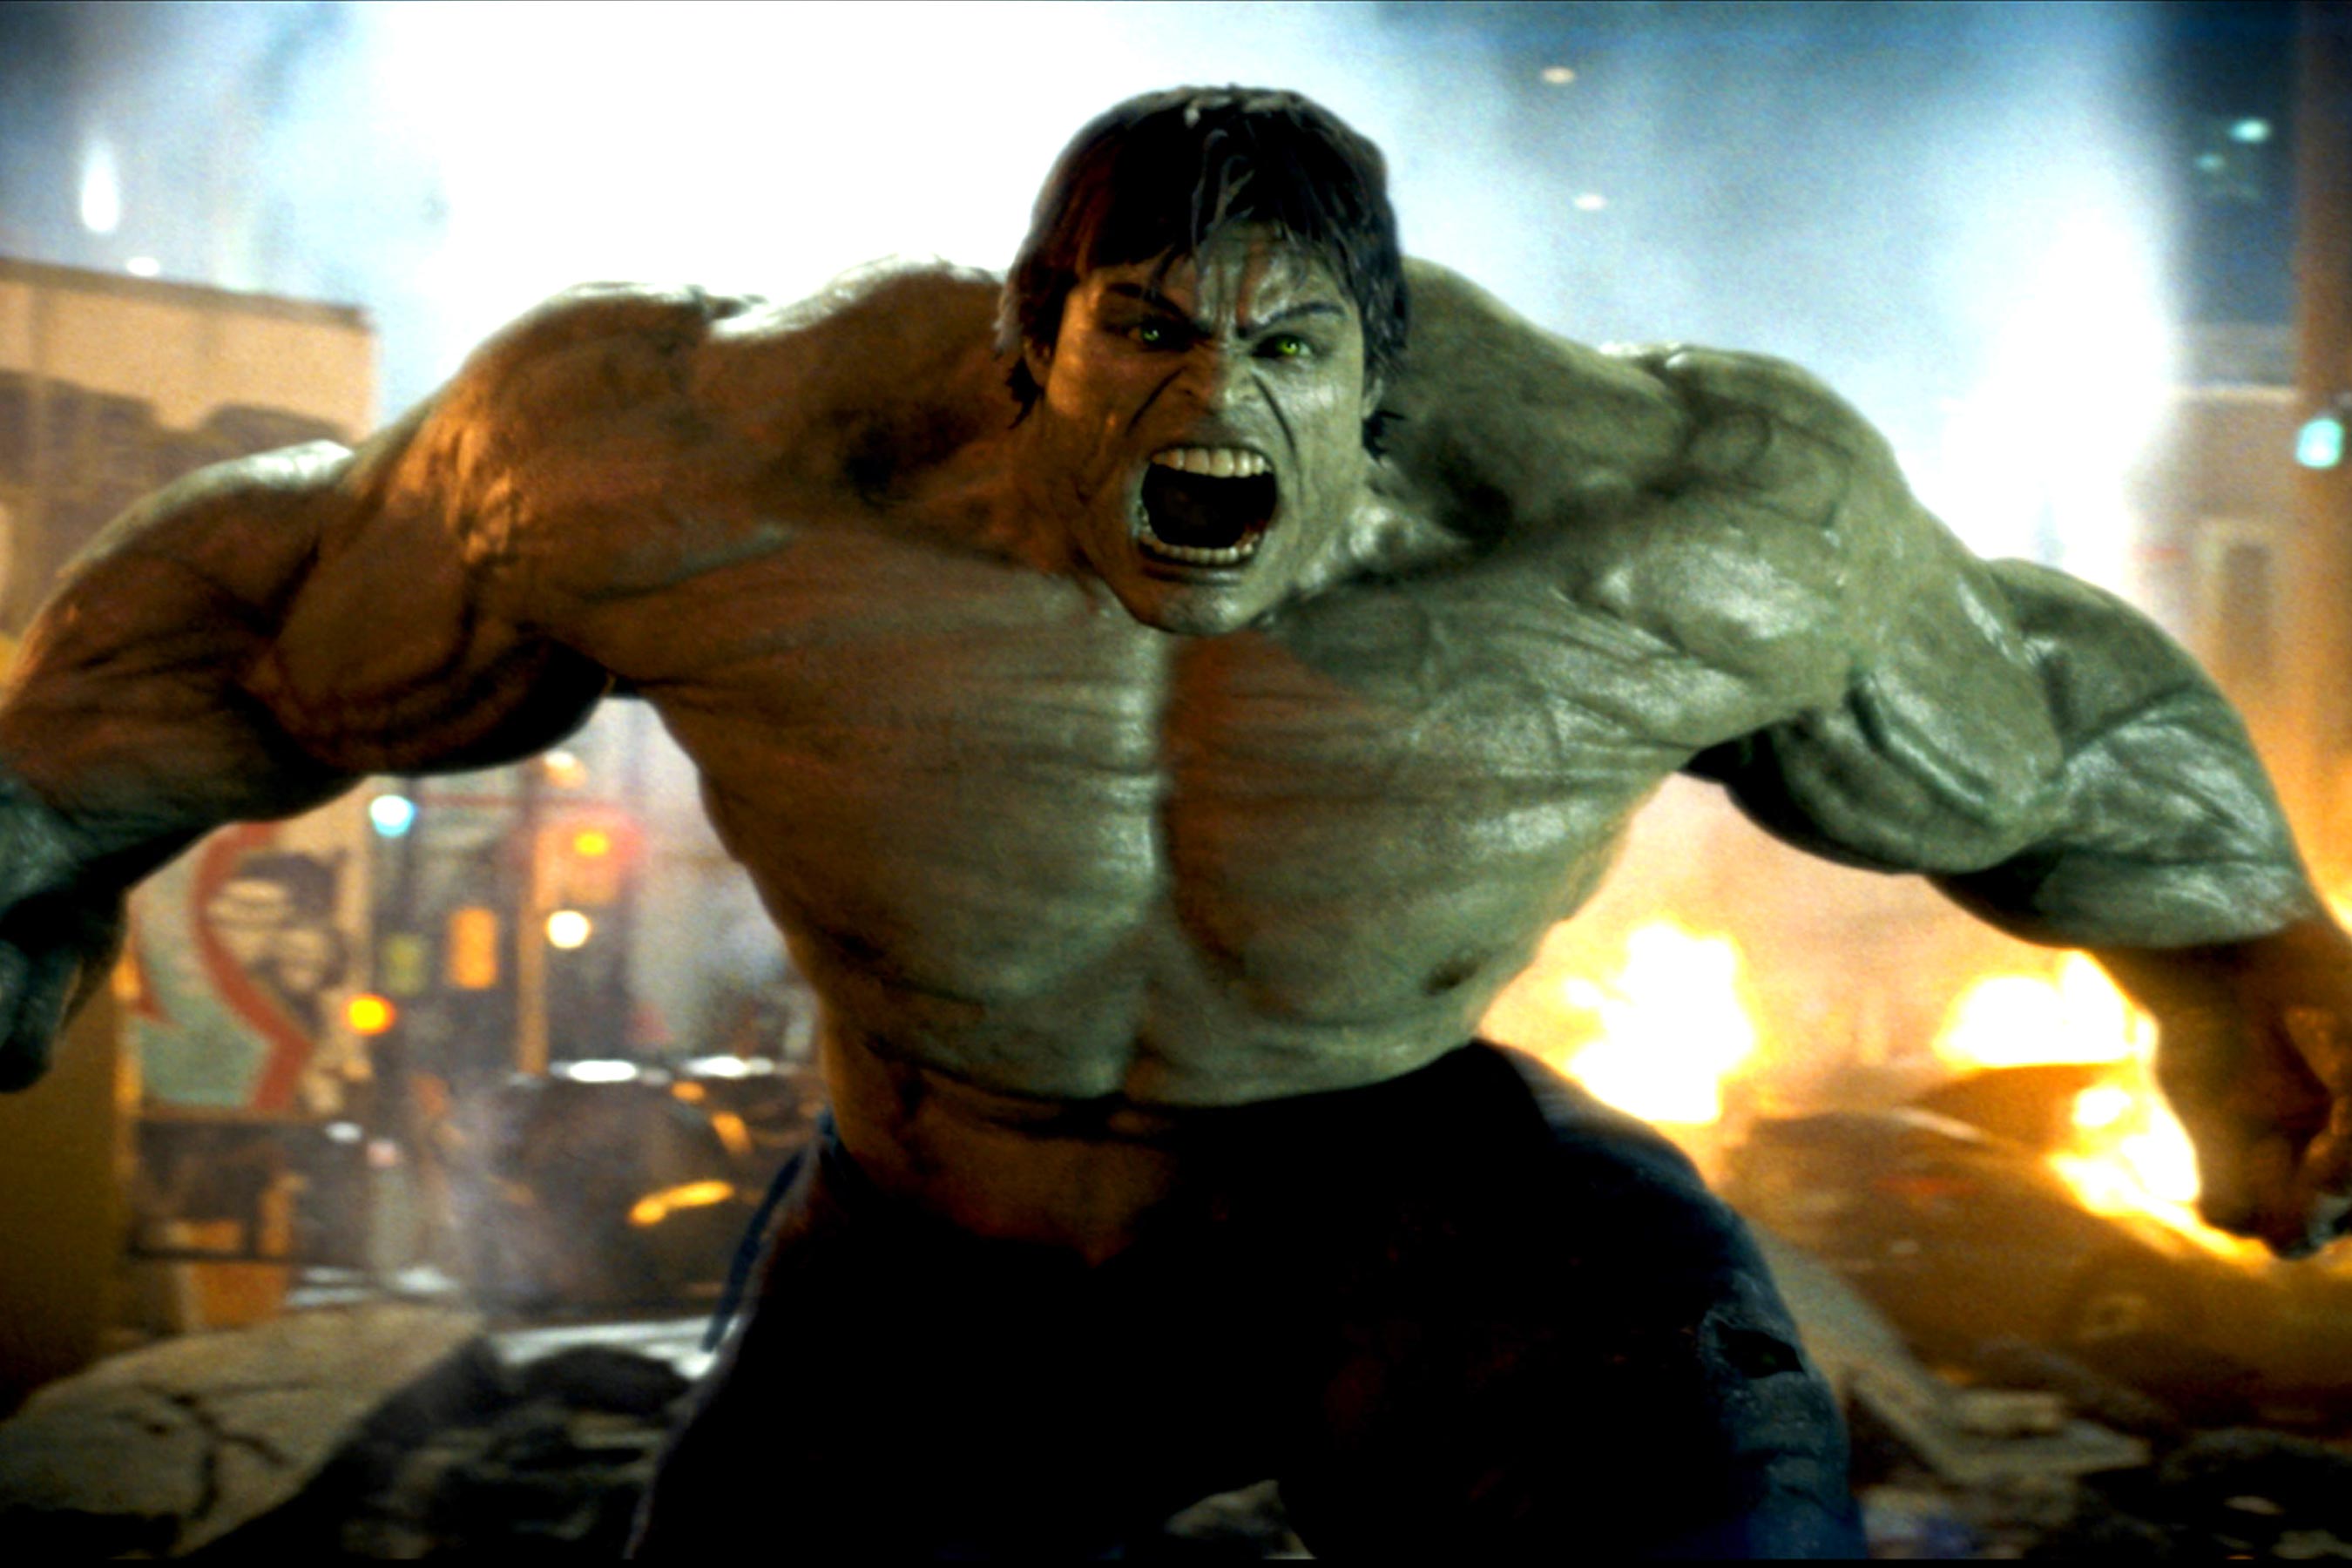 The Hardest Game of “Would You Rather” Marvel Edition The Incredible Hulk (2008)